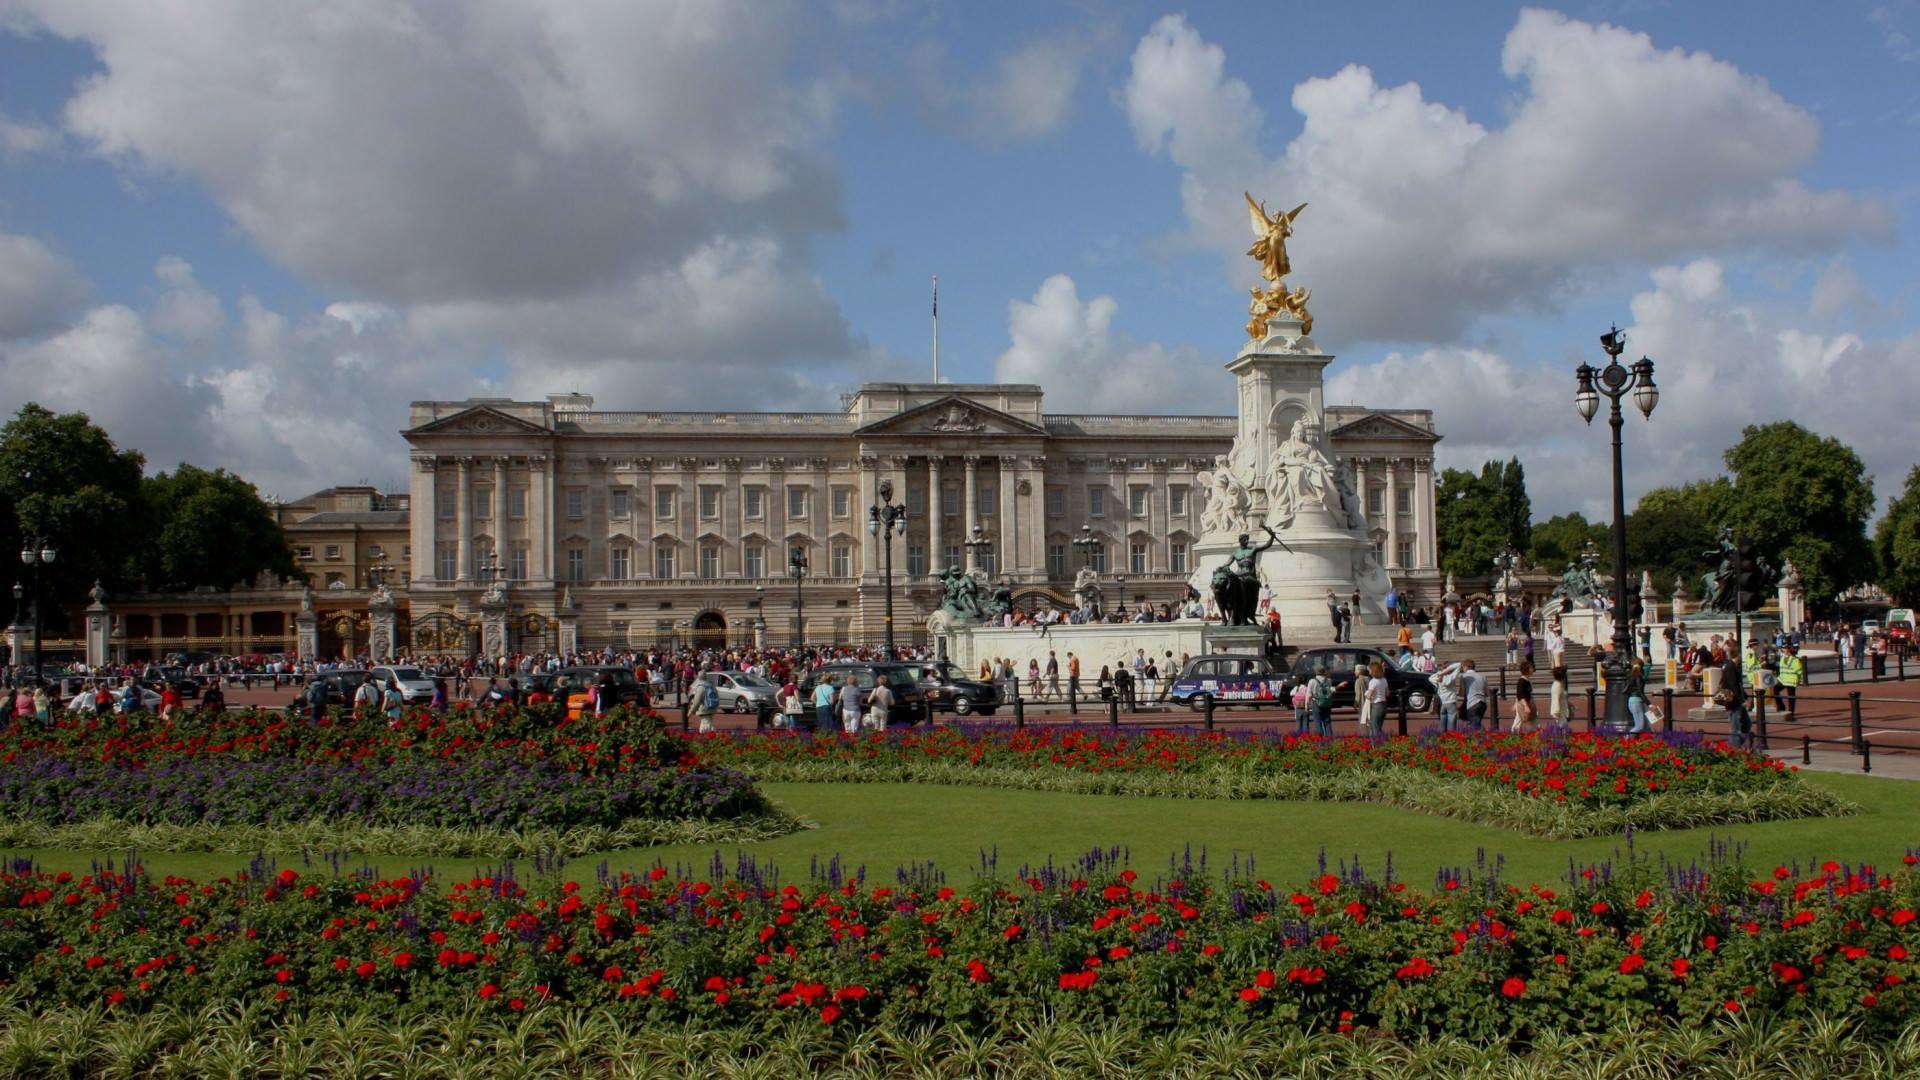 The square in front of Buckingham Palace in London wallpaper